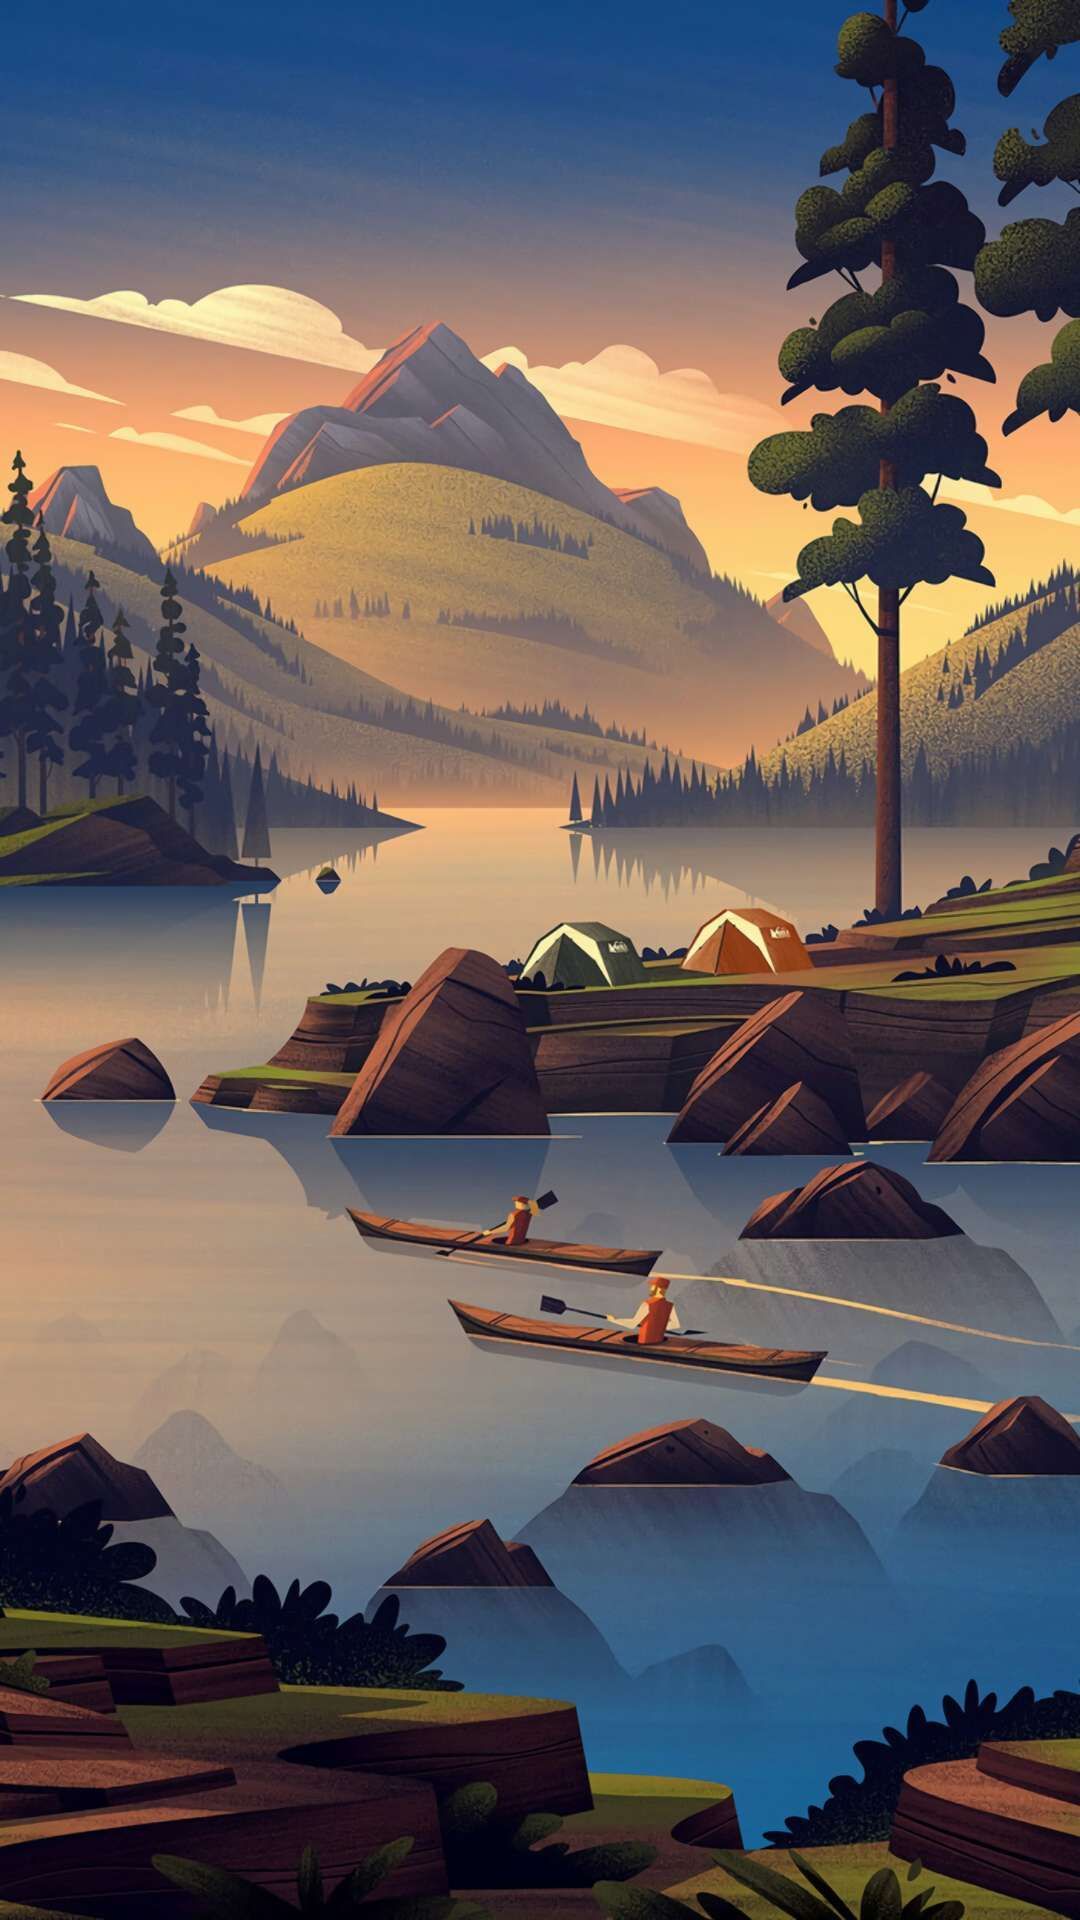 Illustration of a landscape with a lake, mountains, and people in boats. - Camping